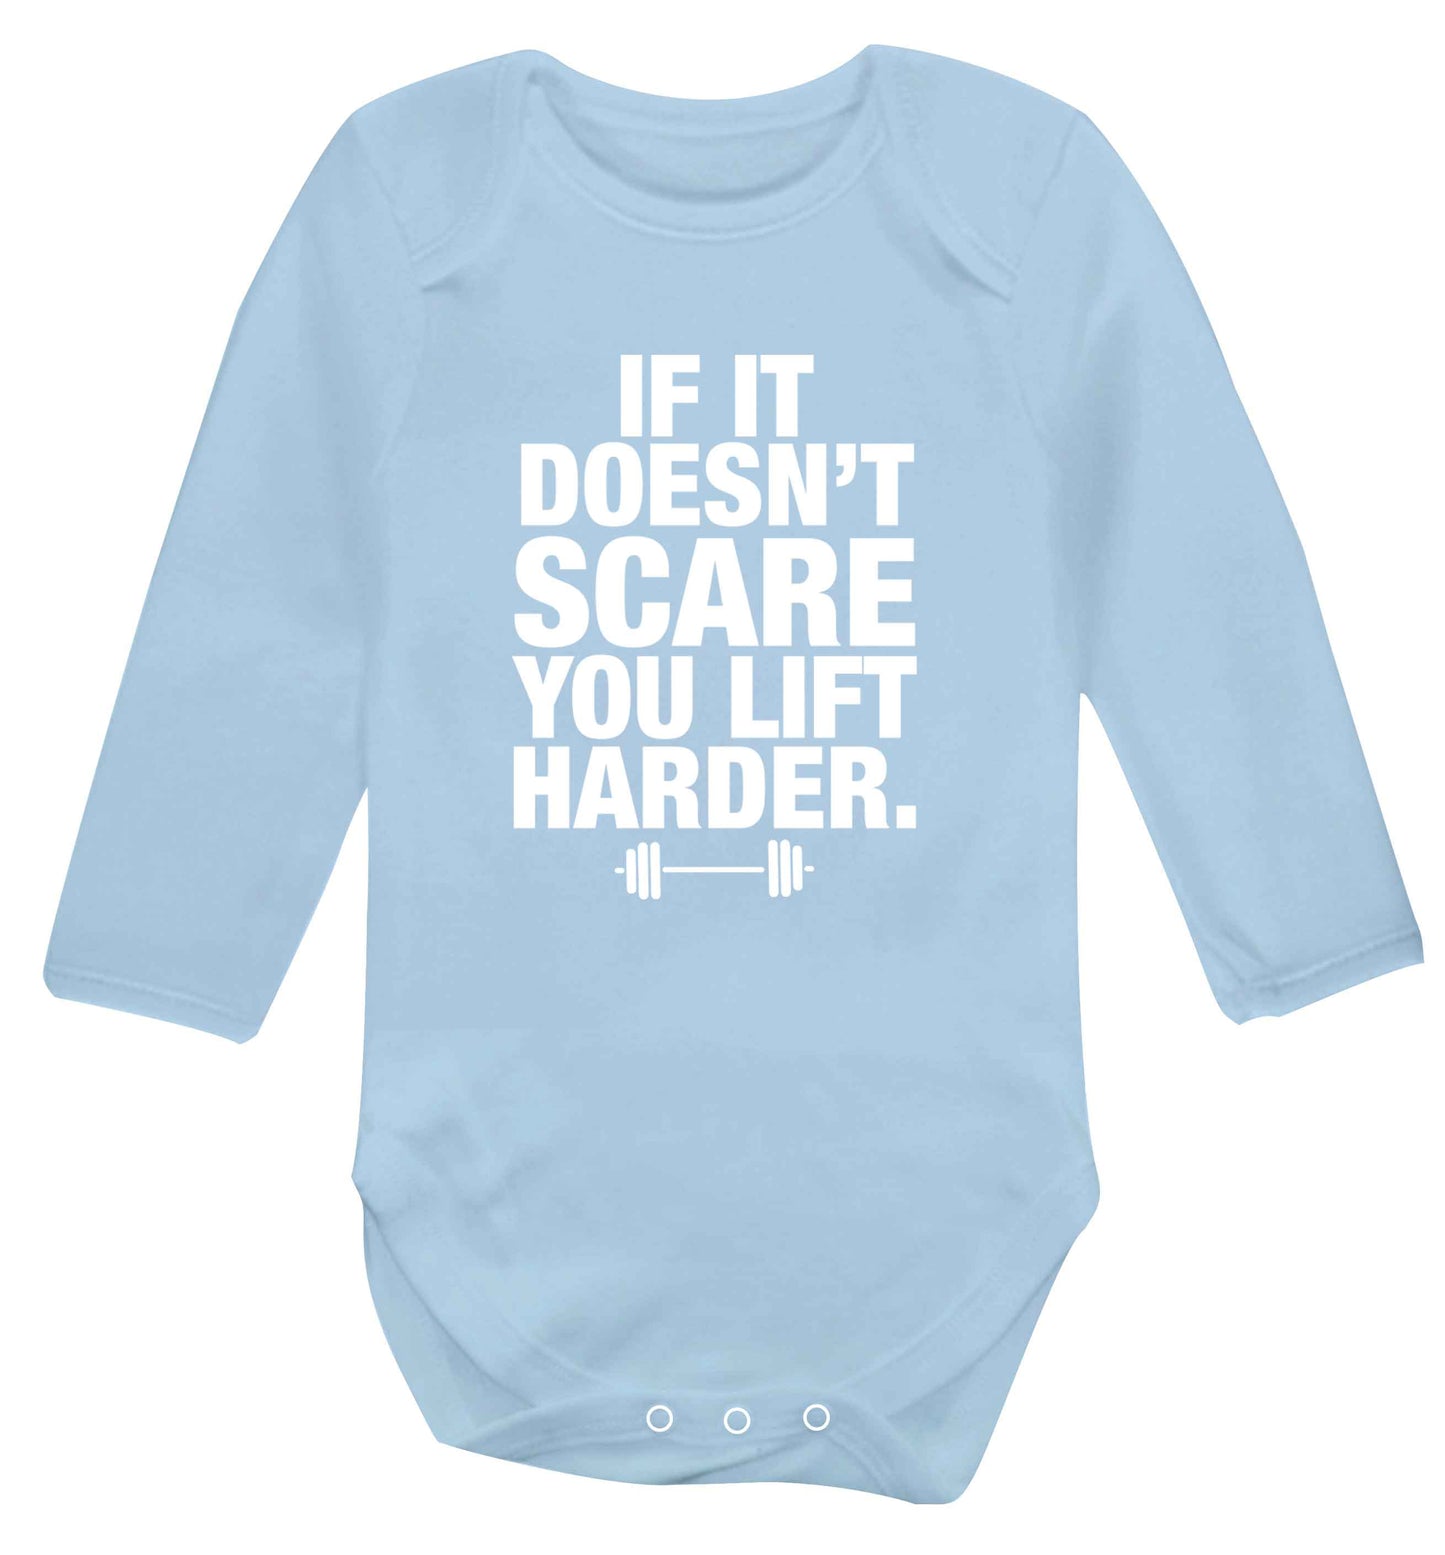 If it doesnt' scare you lift harder Baby Vest long sleeved pale blue 6-12 months